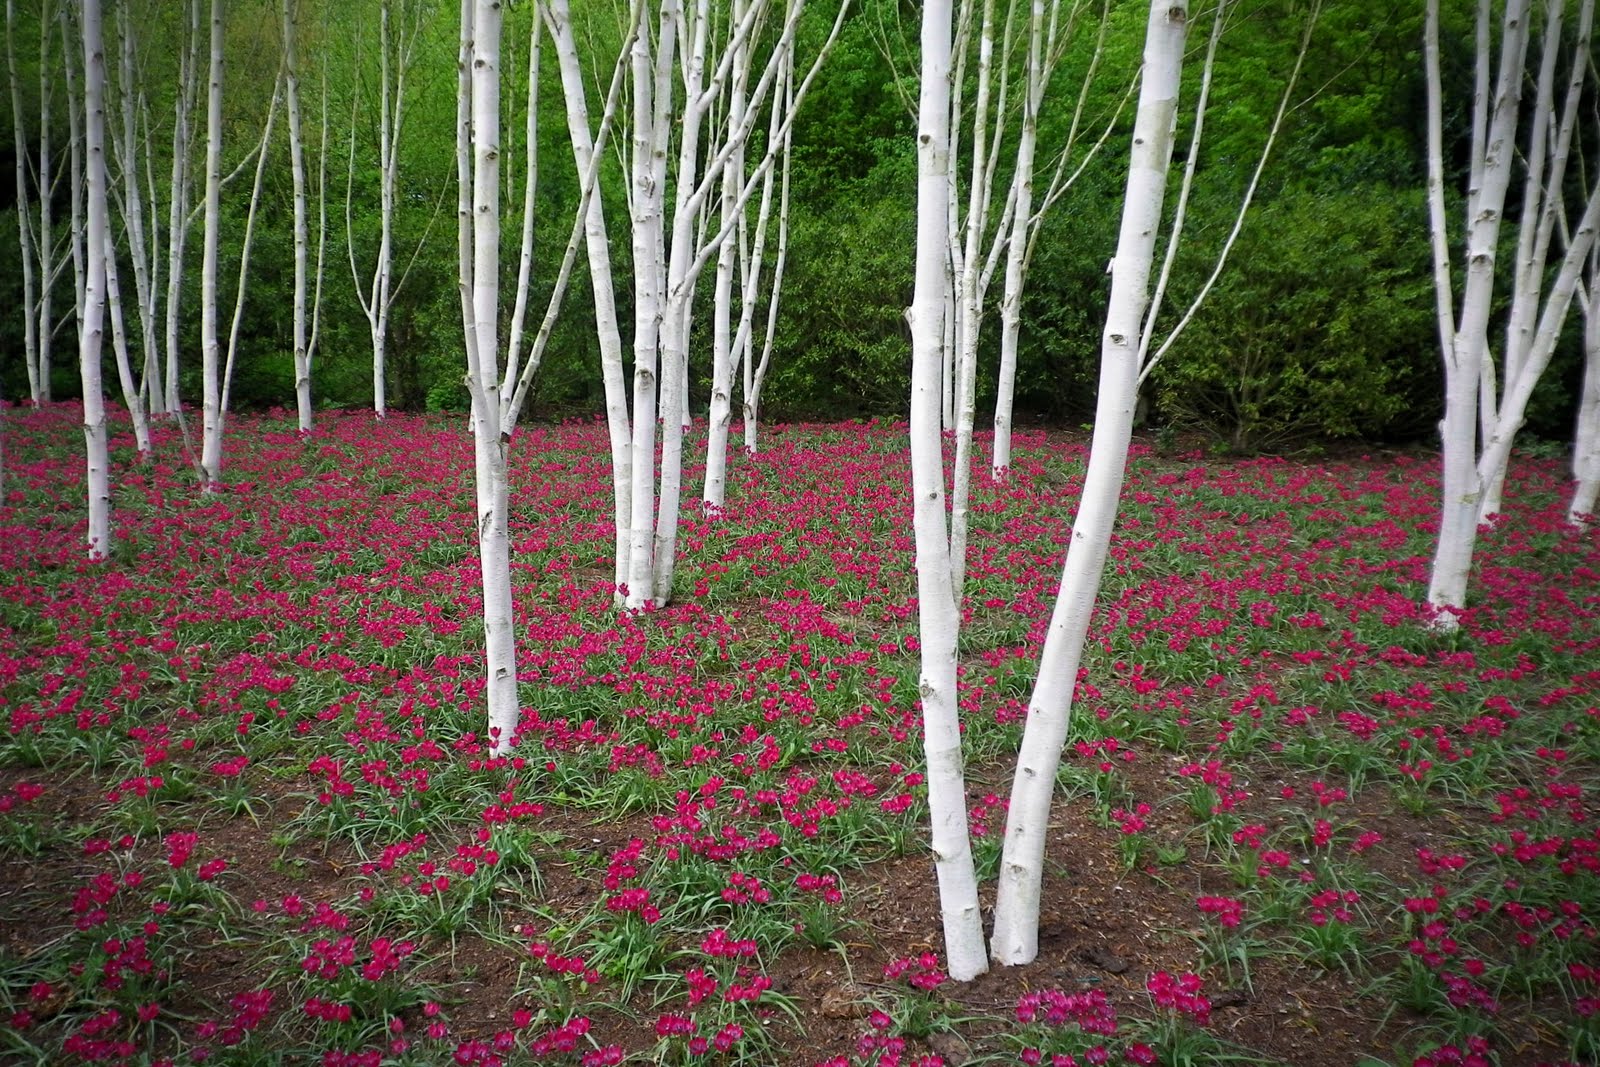 The grove of the dancing birches. Land of the Silver Birch.